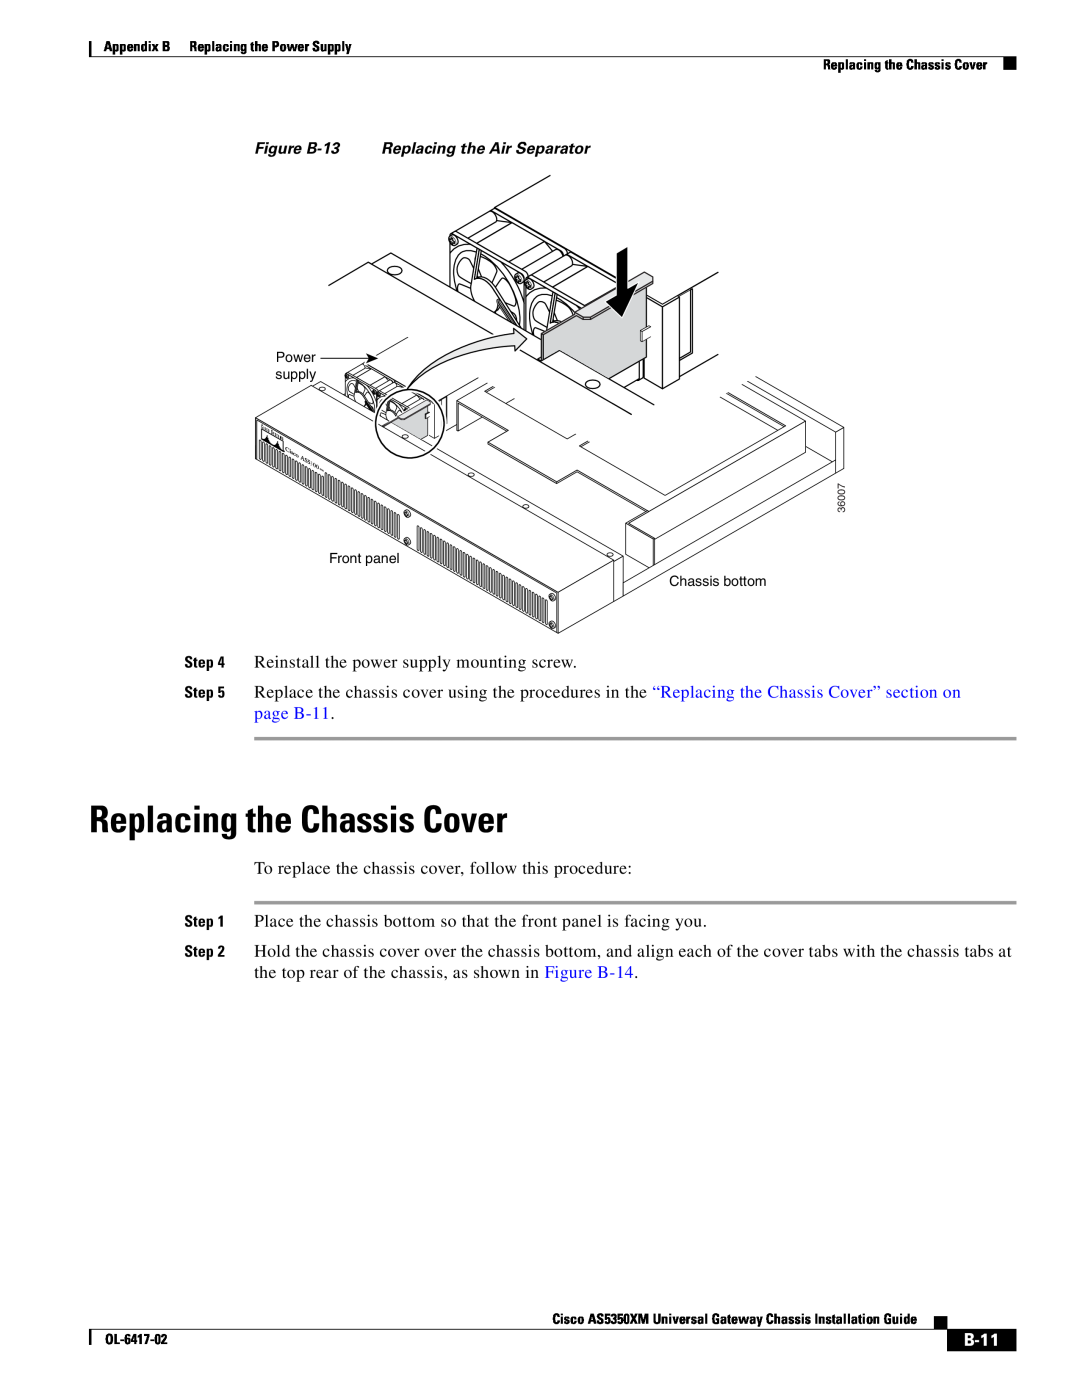 Cisco Systems AS5350XM manual B-11, Replacing the Chassis Cover, Figure B-13 Replacing the Air Separator 